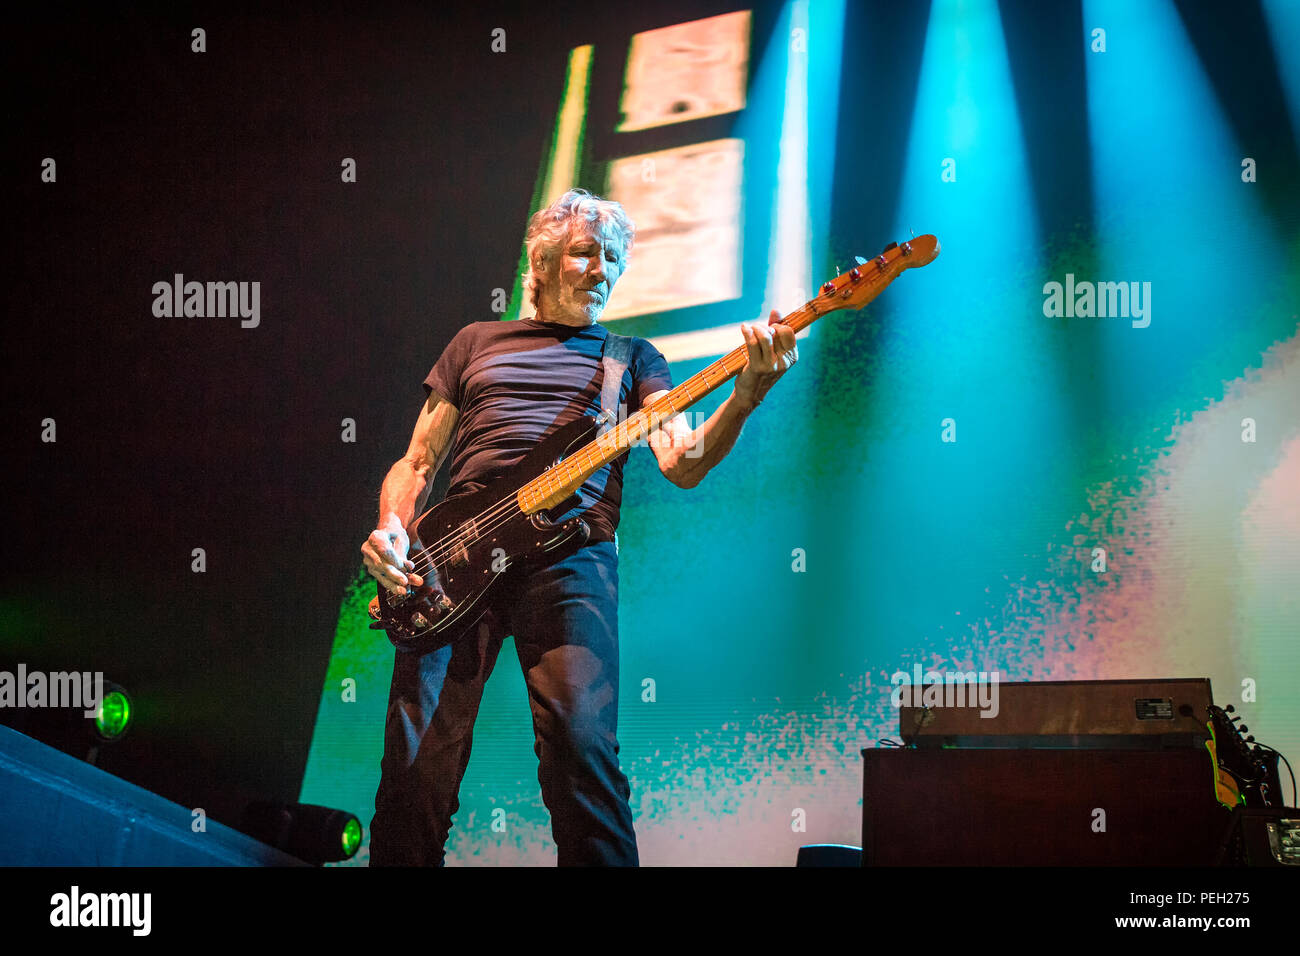 Norway, Oslo - August 14, 2018. The English singer, songwriter and musician Roger Waters performs a live concert at Telenor Arena in Oslo as part of the Us + Them Tour 2018. (Photo credit: Gonzales Photo - Terje Dokken) Credit: Gonzales Photo/Alamy Live News Stock Photo